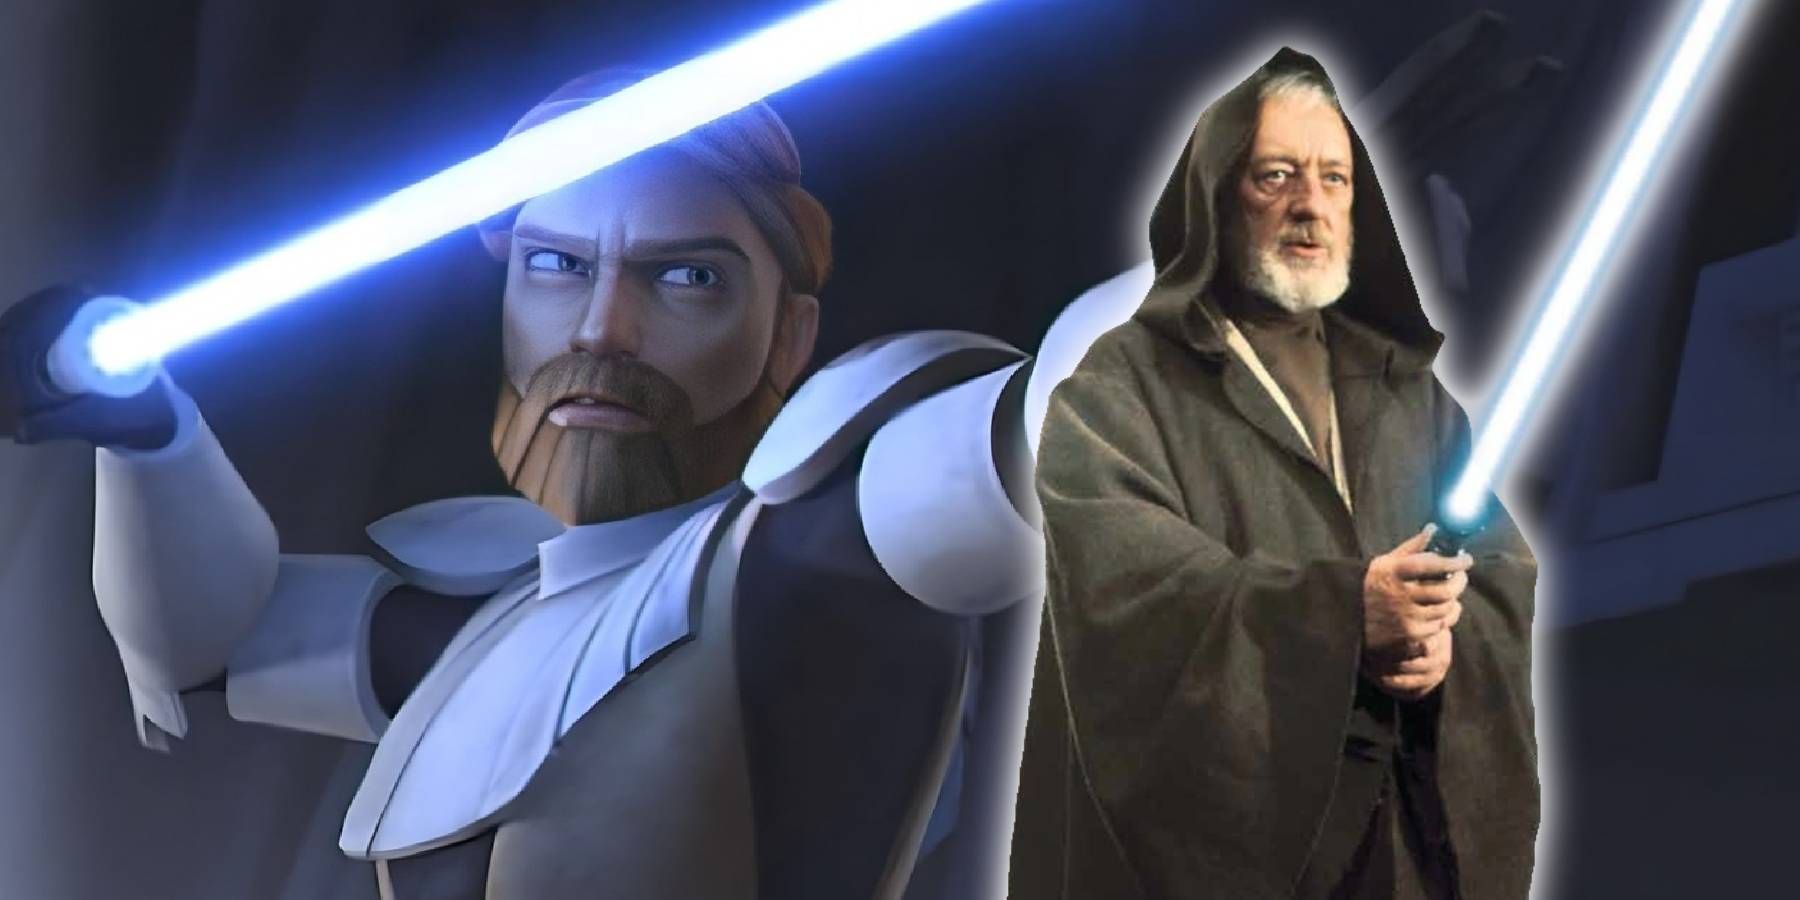 Obi-Wan Kenobi from Star Wars: The Clone Wars animated series and Sir Alec Guinness as Obi-Wan from Star Wars: Episode IV: A New Hope